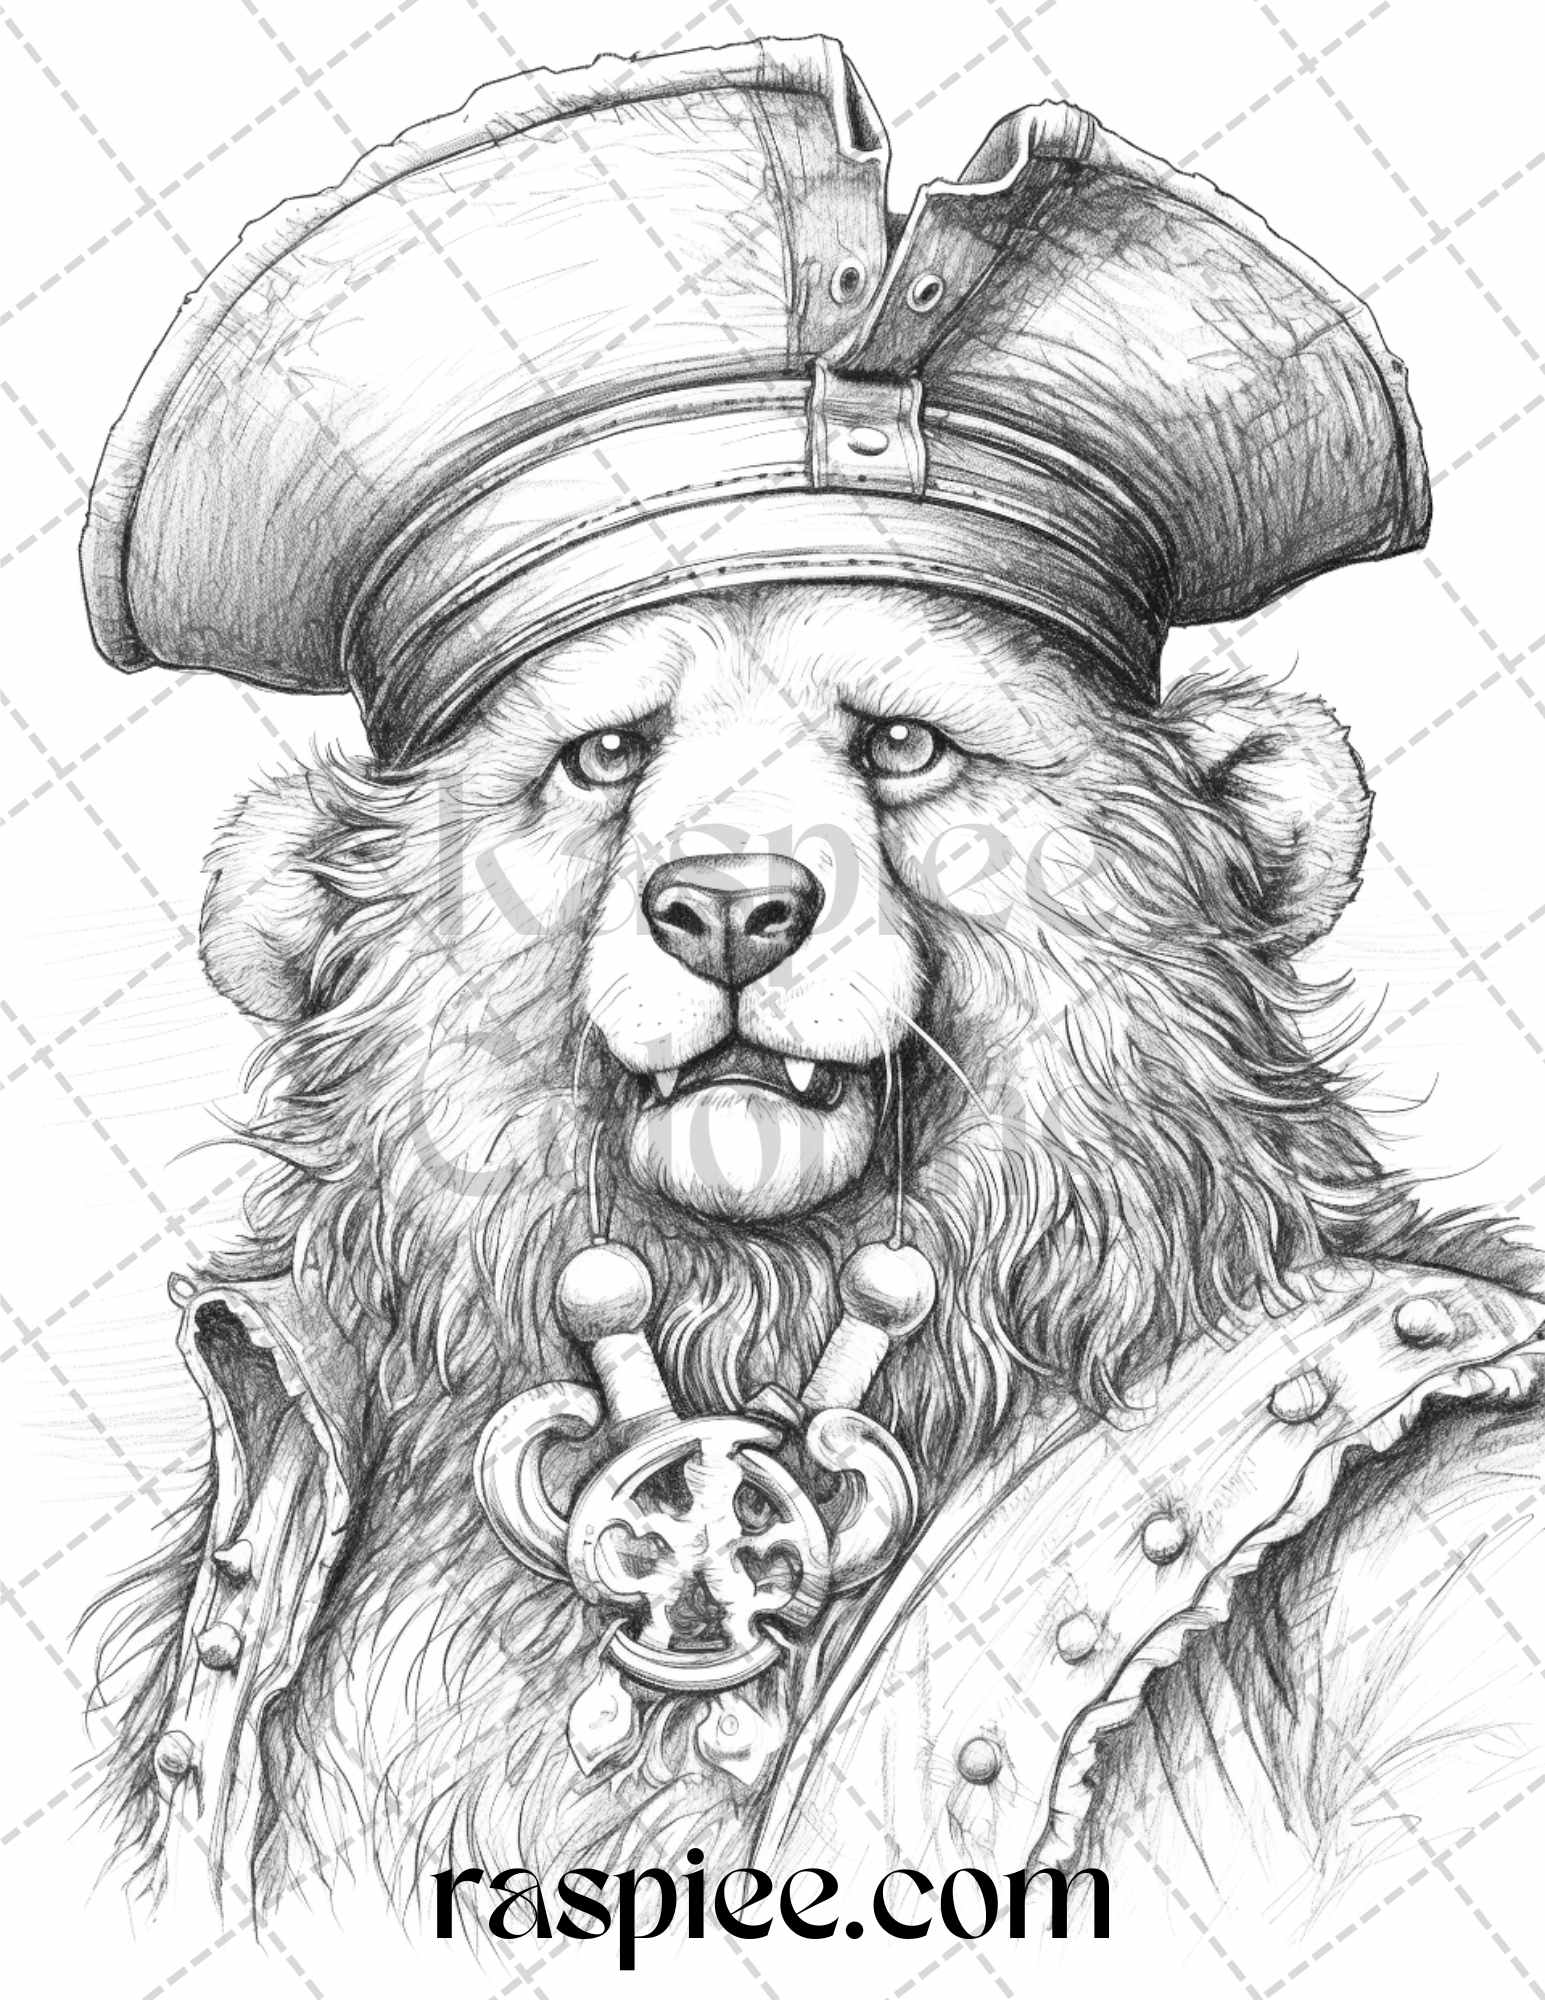 Pirate Animals Grayscale Coloring Page Printable Coloring Pages for Adults, Pirate Theme Coloring Book Page, Printable Animal Illustration, Animal Coloring Pages for Adults